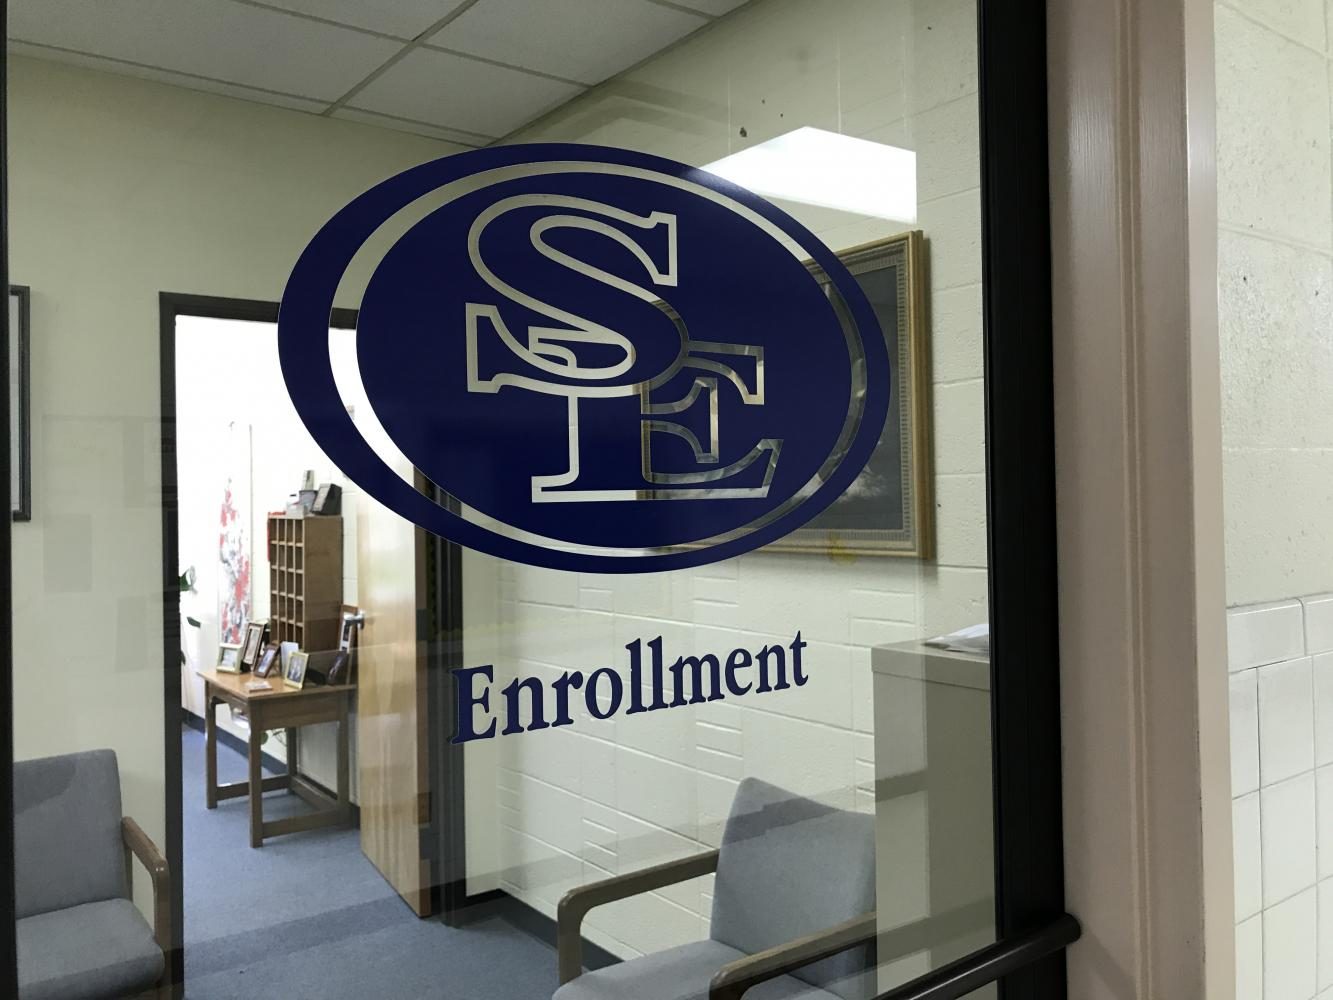 With such a large increase in students this fall, the Enrollment Services department on campus were going nonstop during the first week of classes to get students in classes and ready for this upcoming semester.